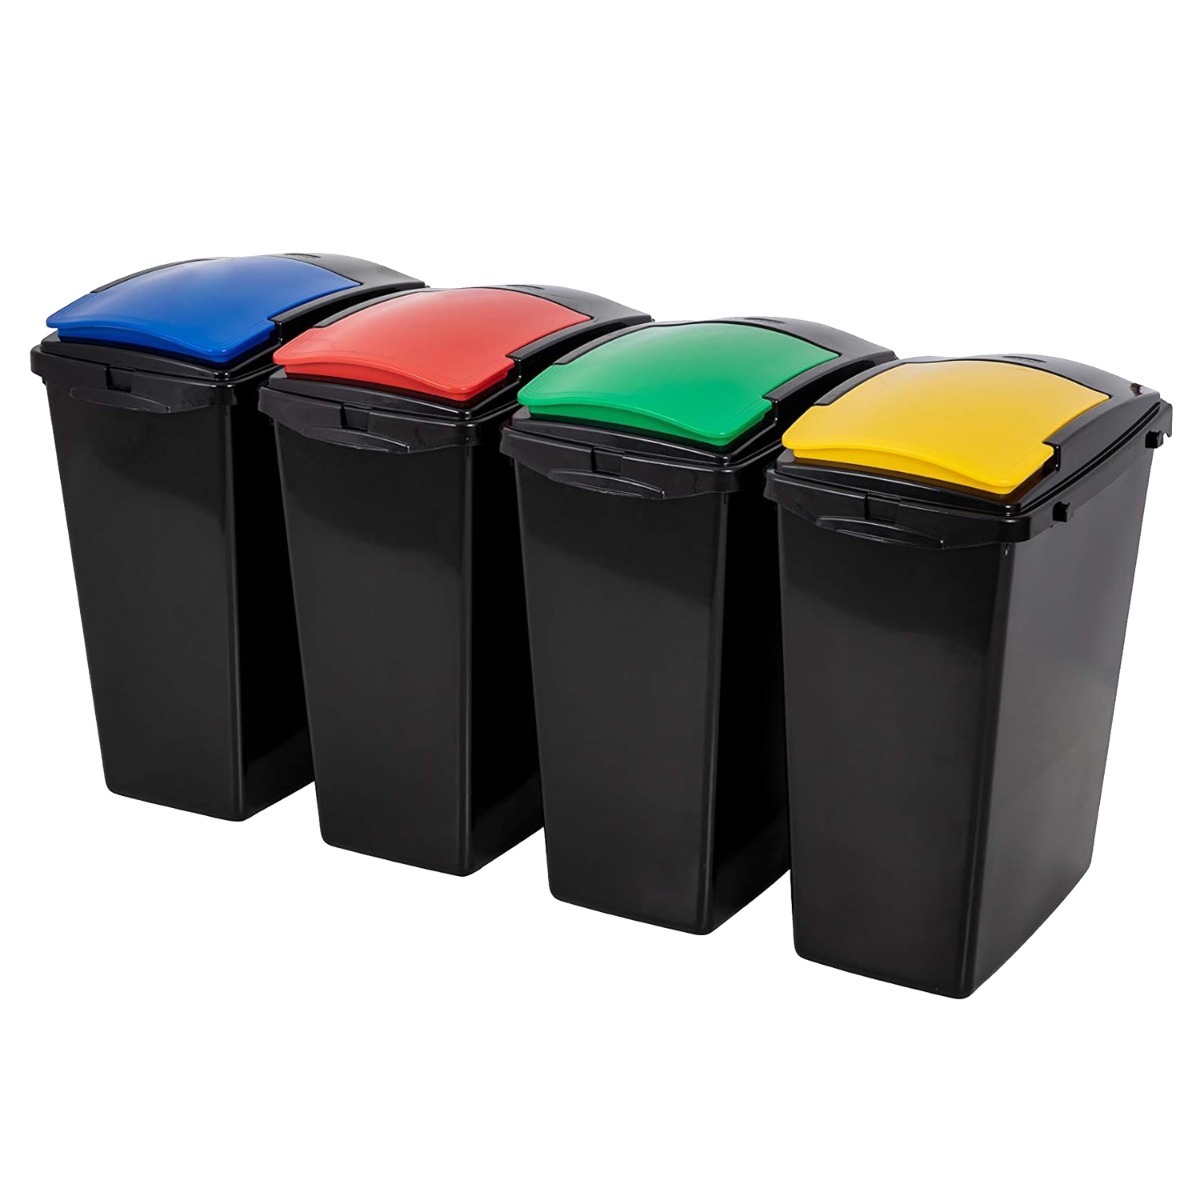 Addis 40L Yellow, Red, Green & Blue Recycling Bins - Set of 4